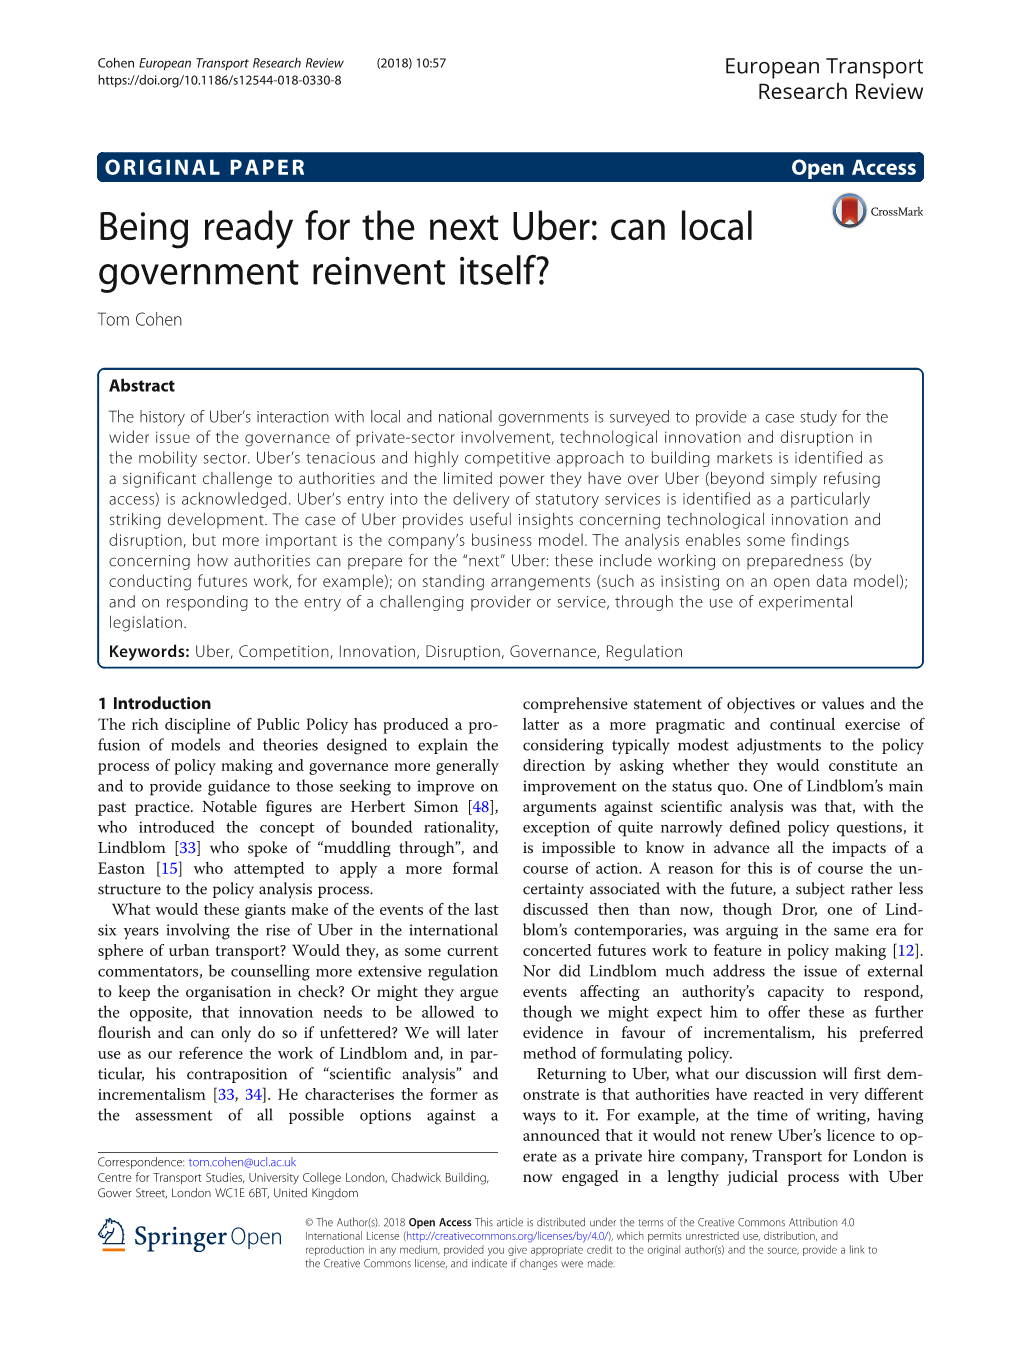 Being Ready for the Next Uber: Can Local Government Reinvent Itself? Tom Cohen